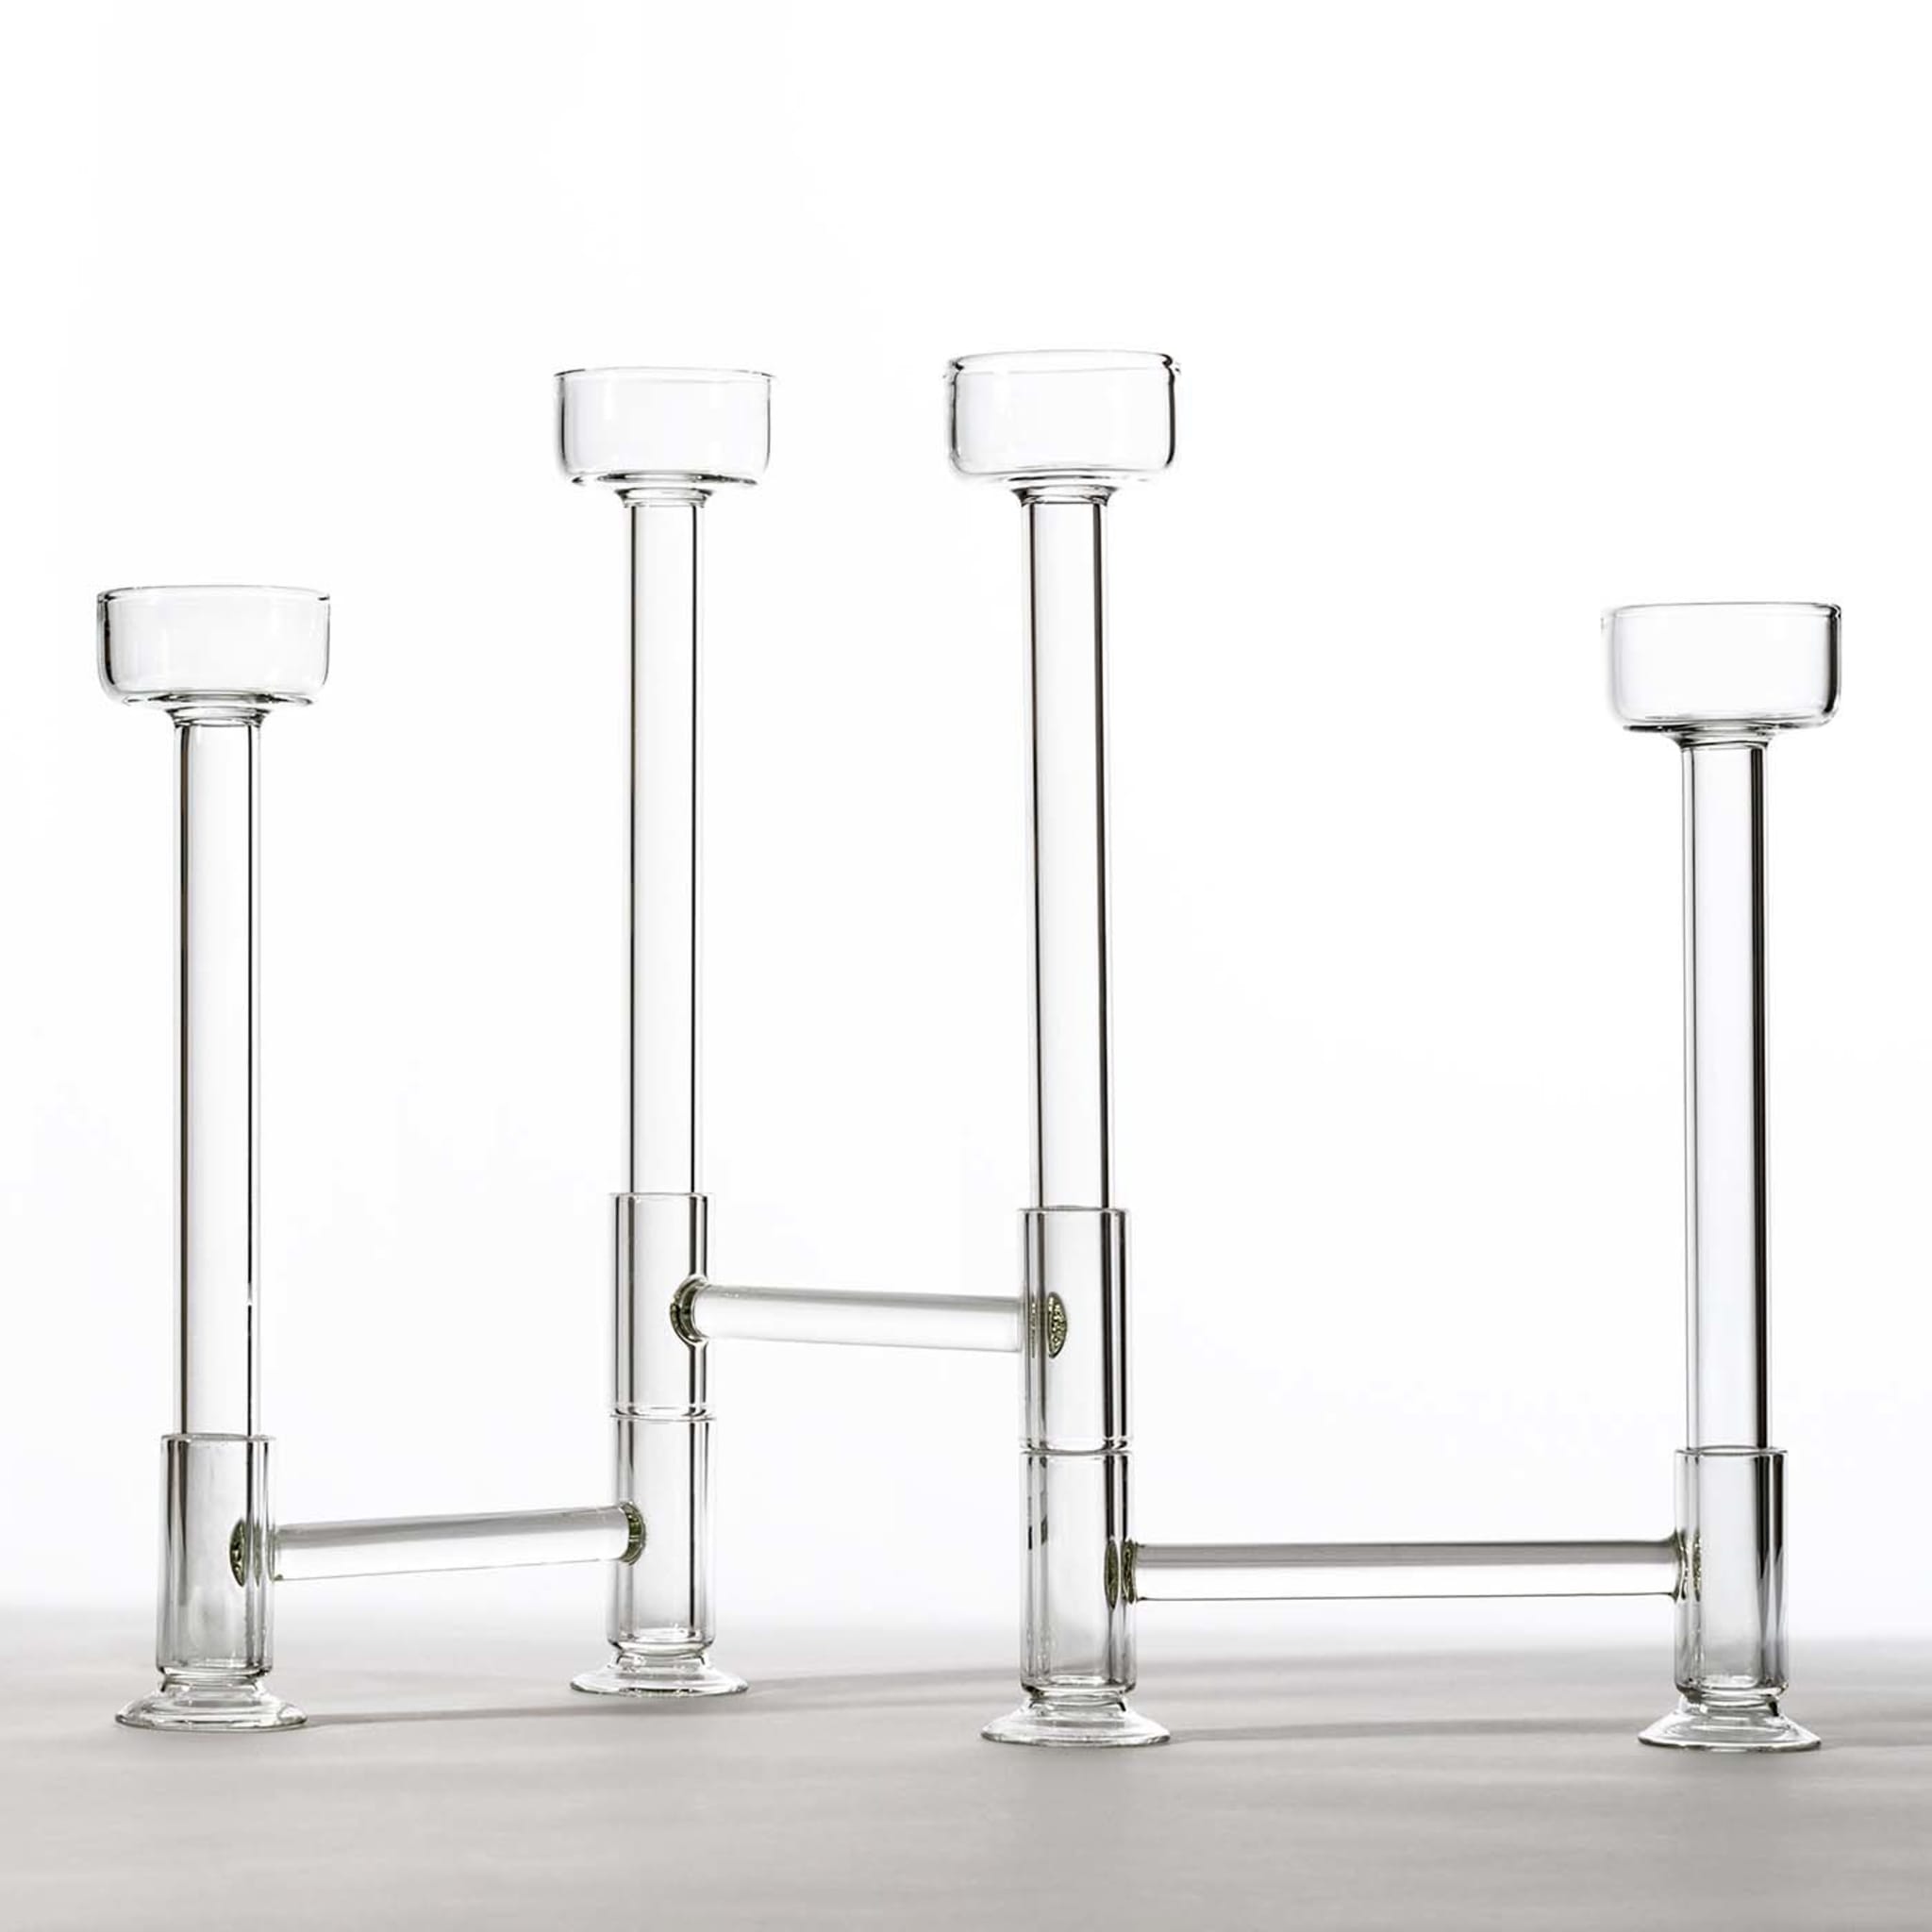 Eolo 4 Candle Holder - Alternative view 1